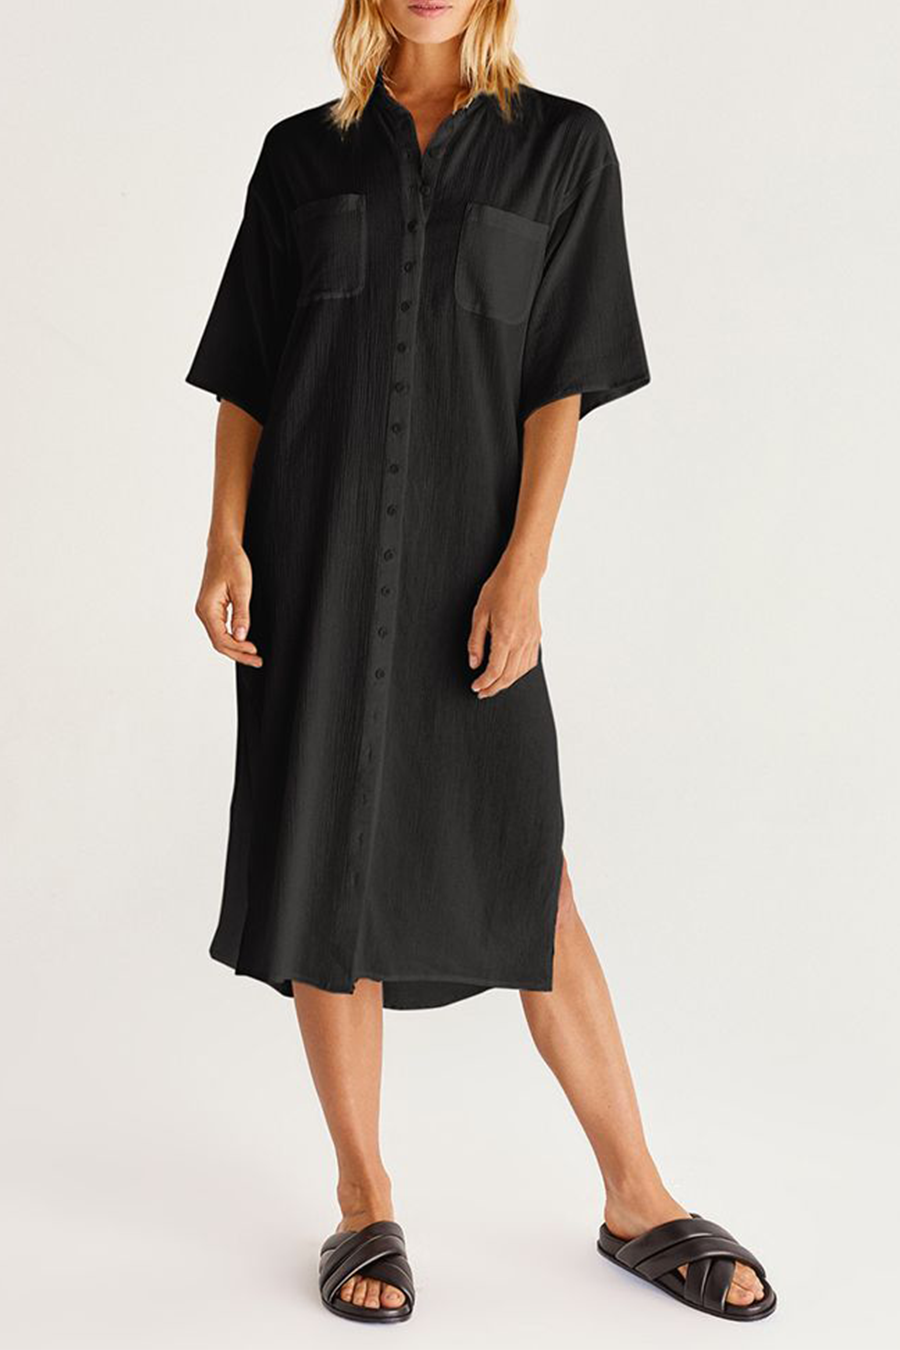 Lina Button Up Duster | Black - Main Image Number 1 of 2